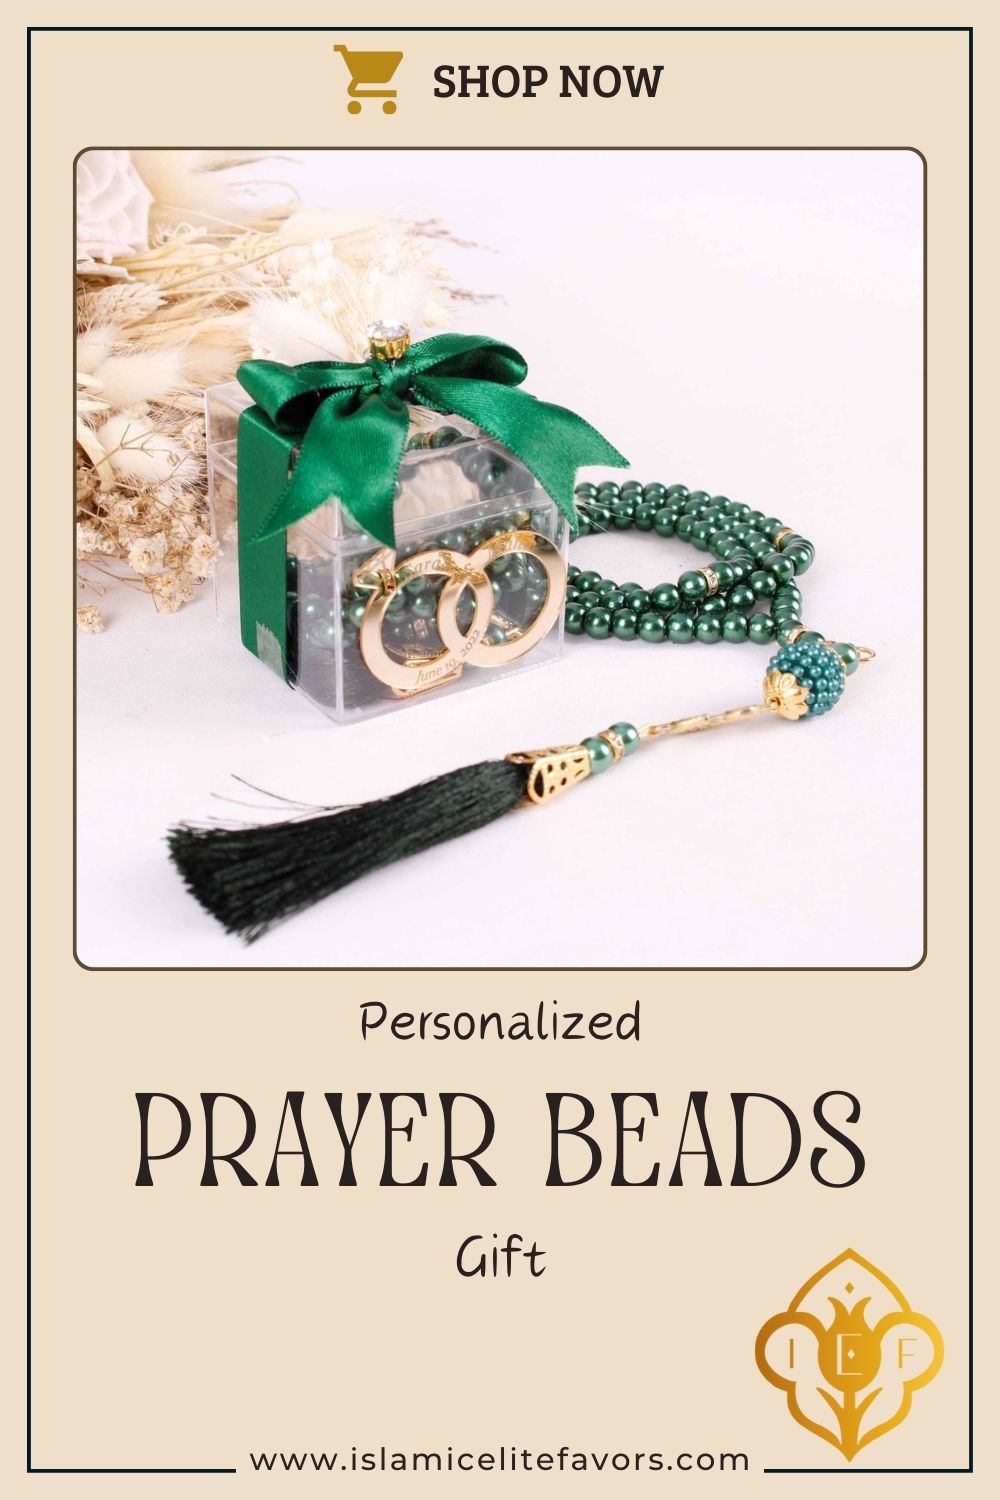 Personalized Prayer Beads Wedding Favor Gift Box with Wedding Rings - Islamic Elite Favors is a handmade gift shop offering a wide variety of unique and personalized gifts for all occasions. Whether you're looking for the perfect Ramadan, Eid, Hajj, wedding gift or something special for a birthday, baby shower or anniversary, we have something for everyone. High quality, made with love.